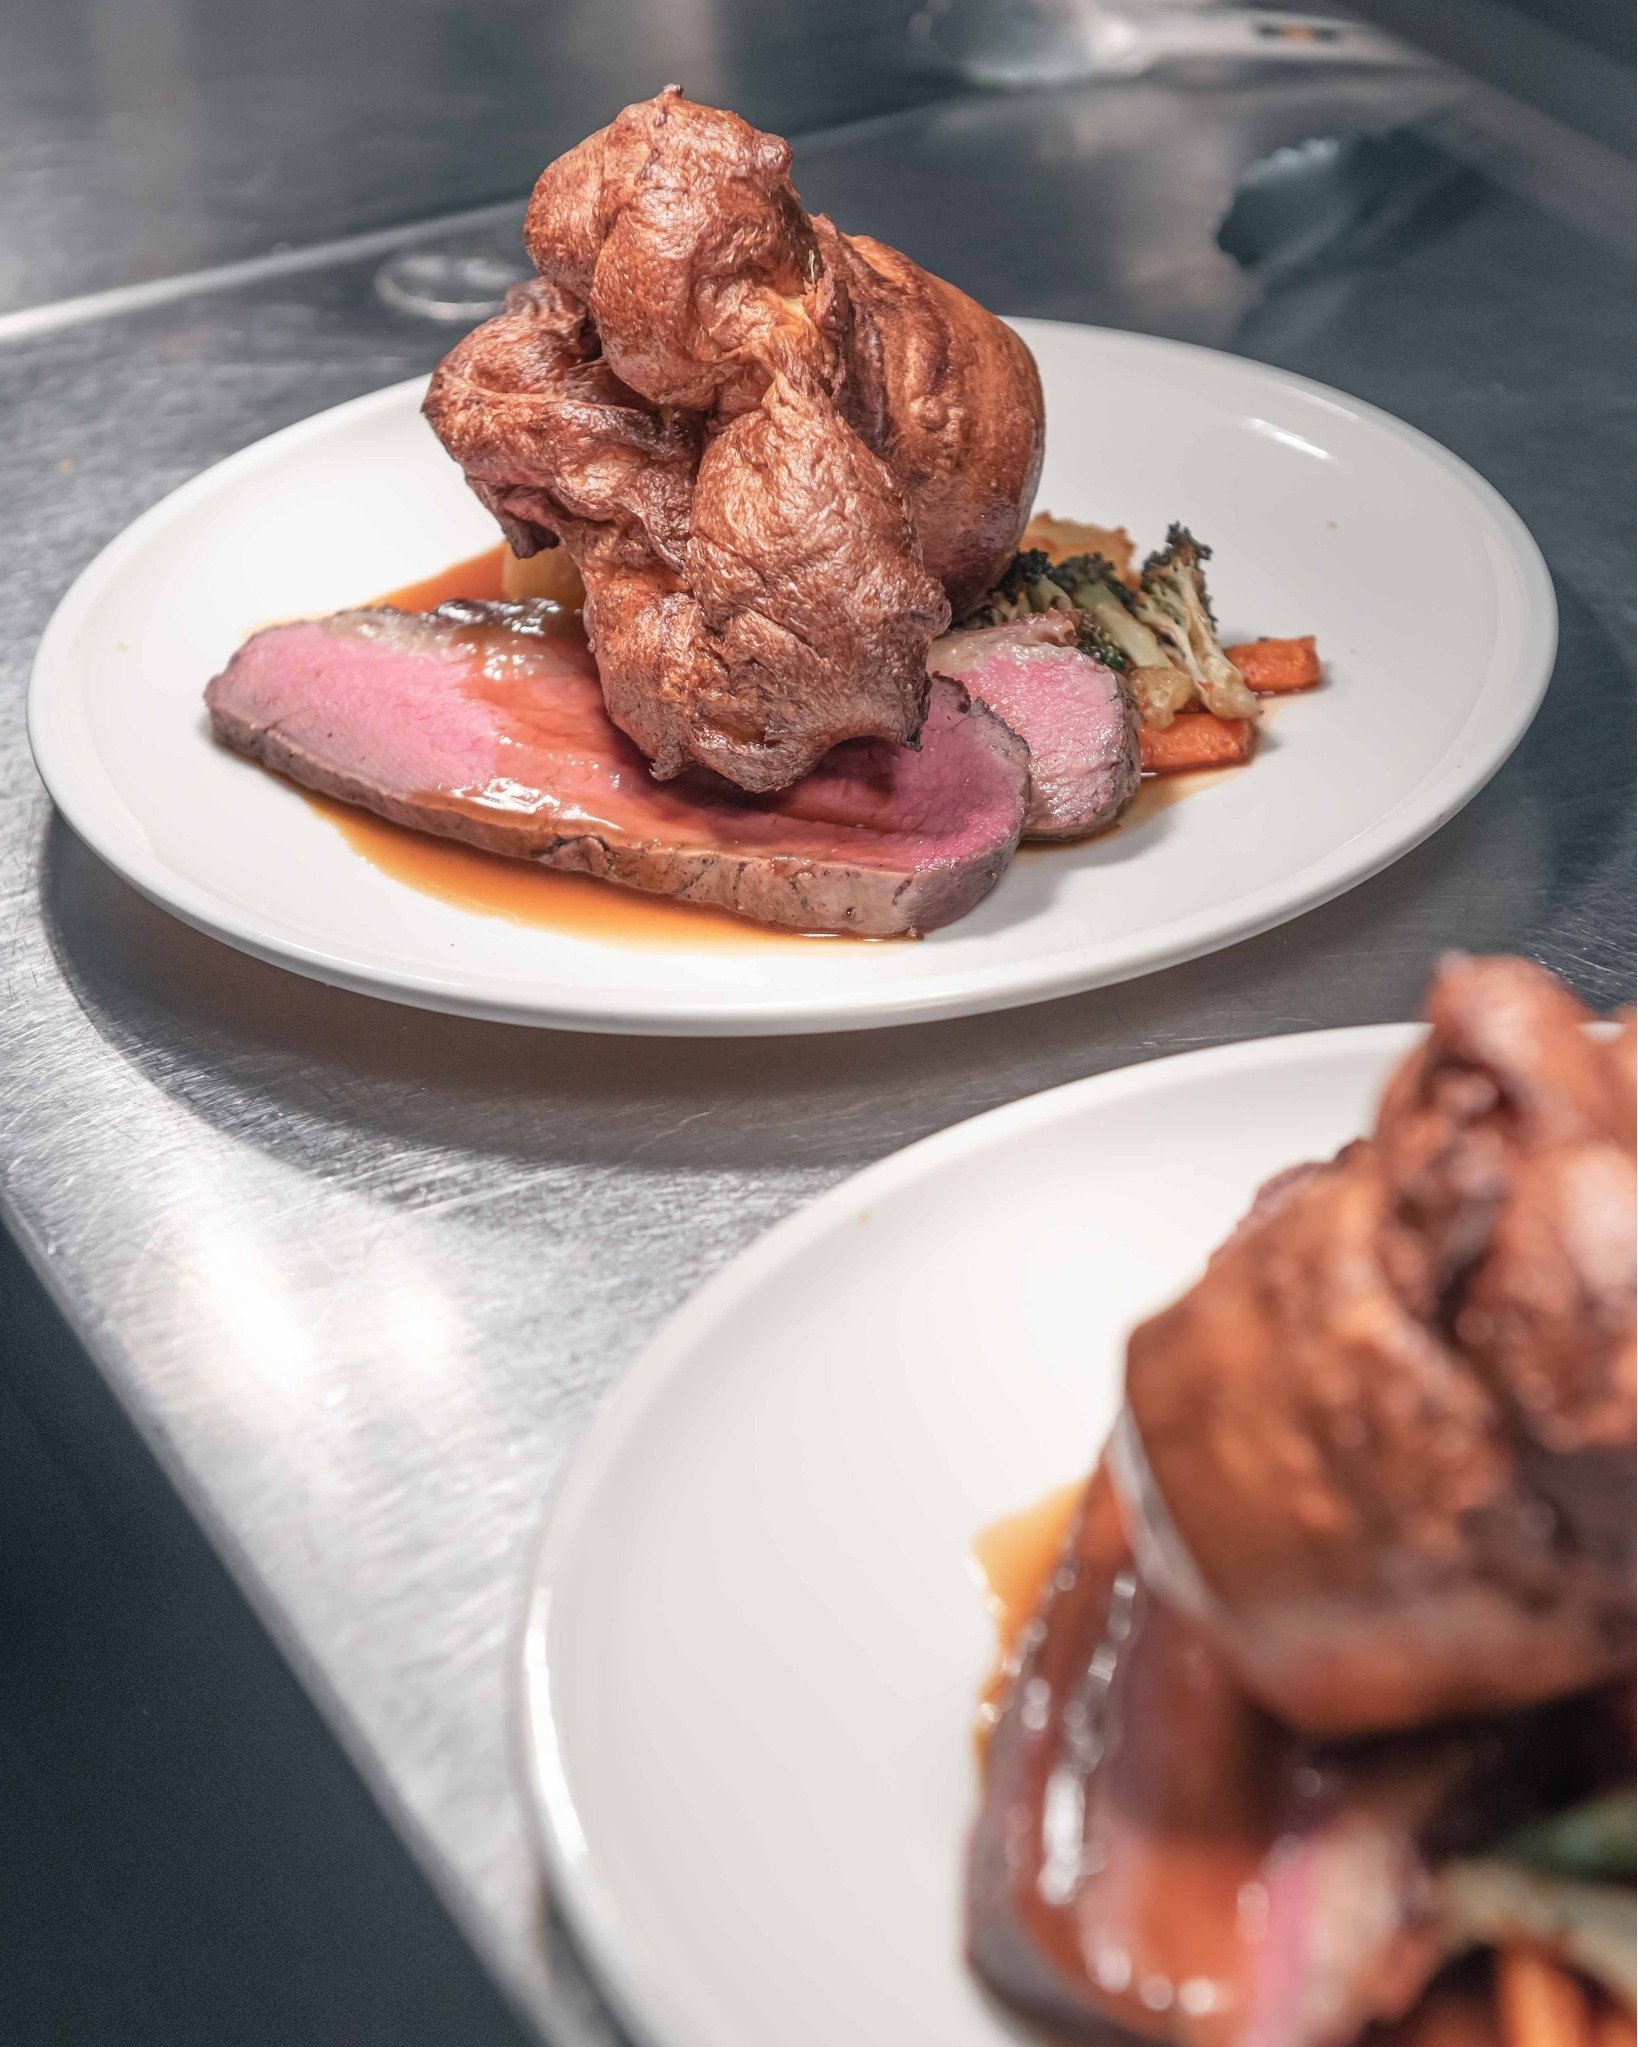 Savour the Sunday tradition with our mouth-watering Herefordshire Sirloin of Beef, served with golden Yorkshire Pudding, Crispy Roast Potatoes, and rich Gravy.
Seasonal Vegetables &amp; Cauliflower cheese too! 

Tables available this weekend. Call or